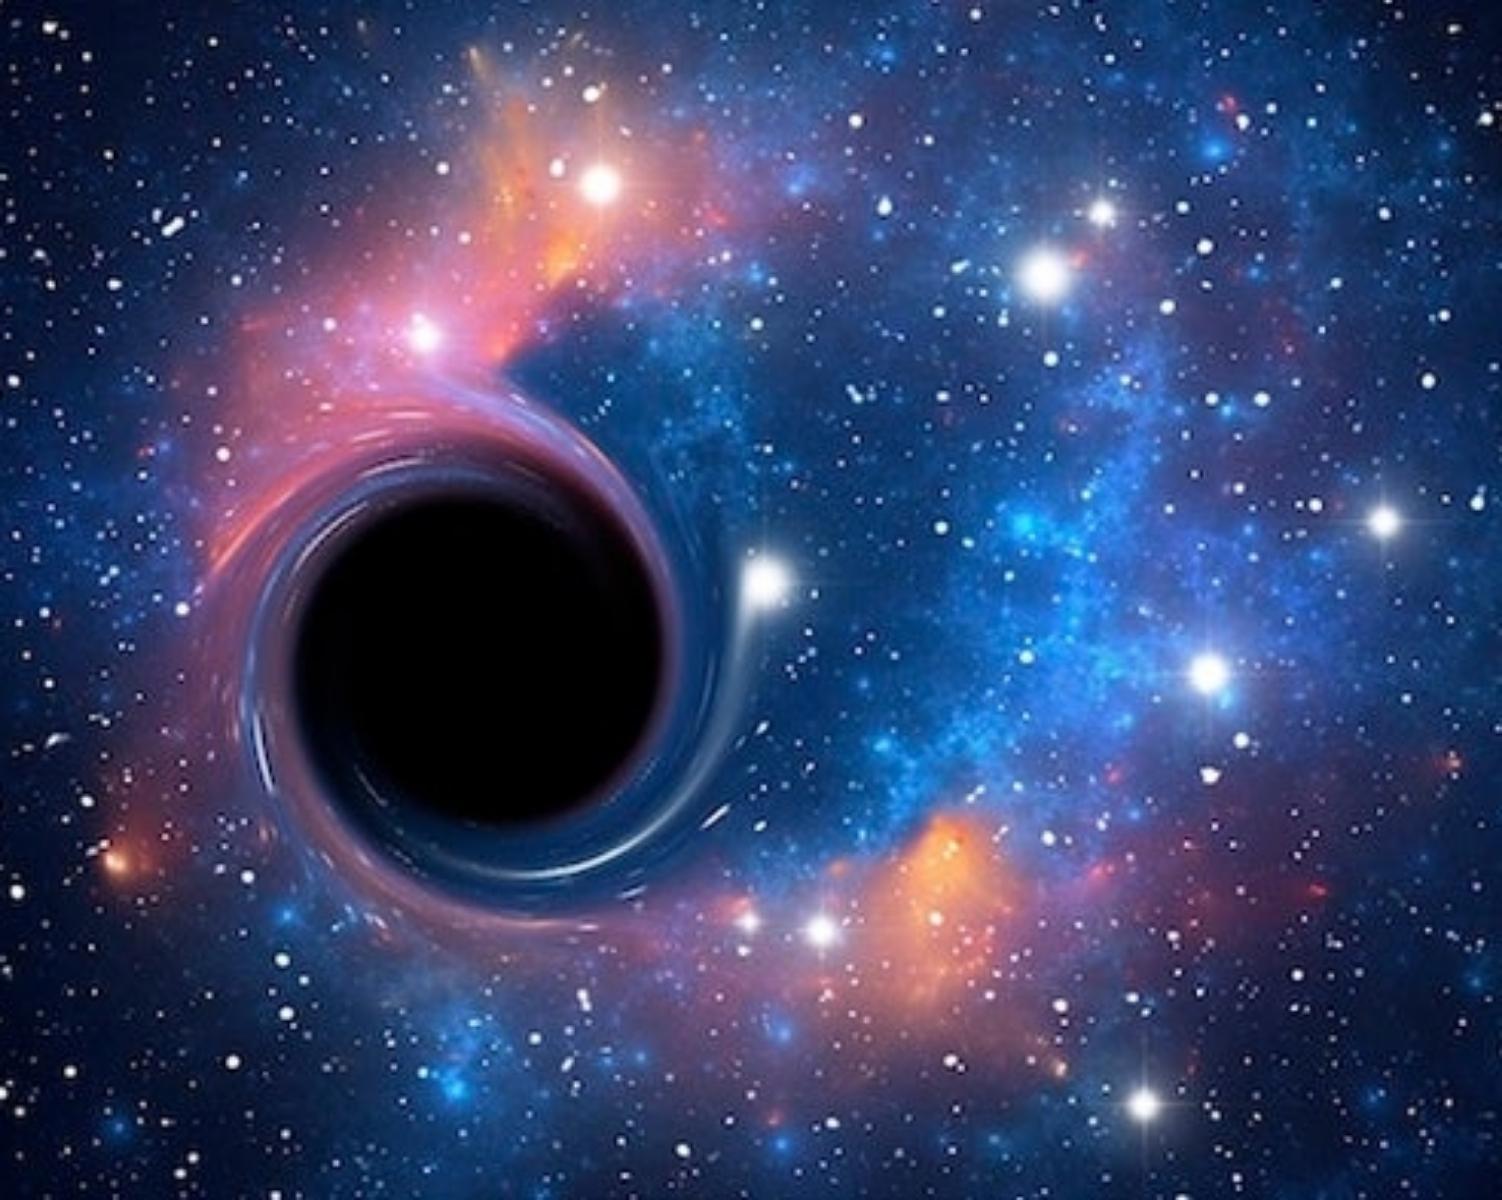 How Do We Know The Black Hole Is Black? 